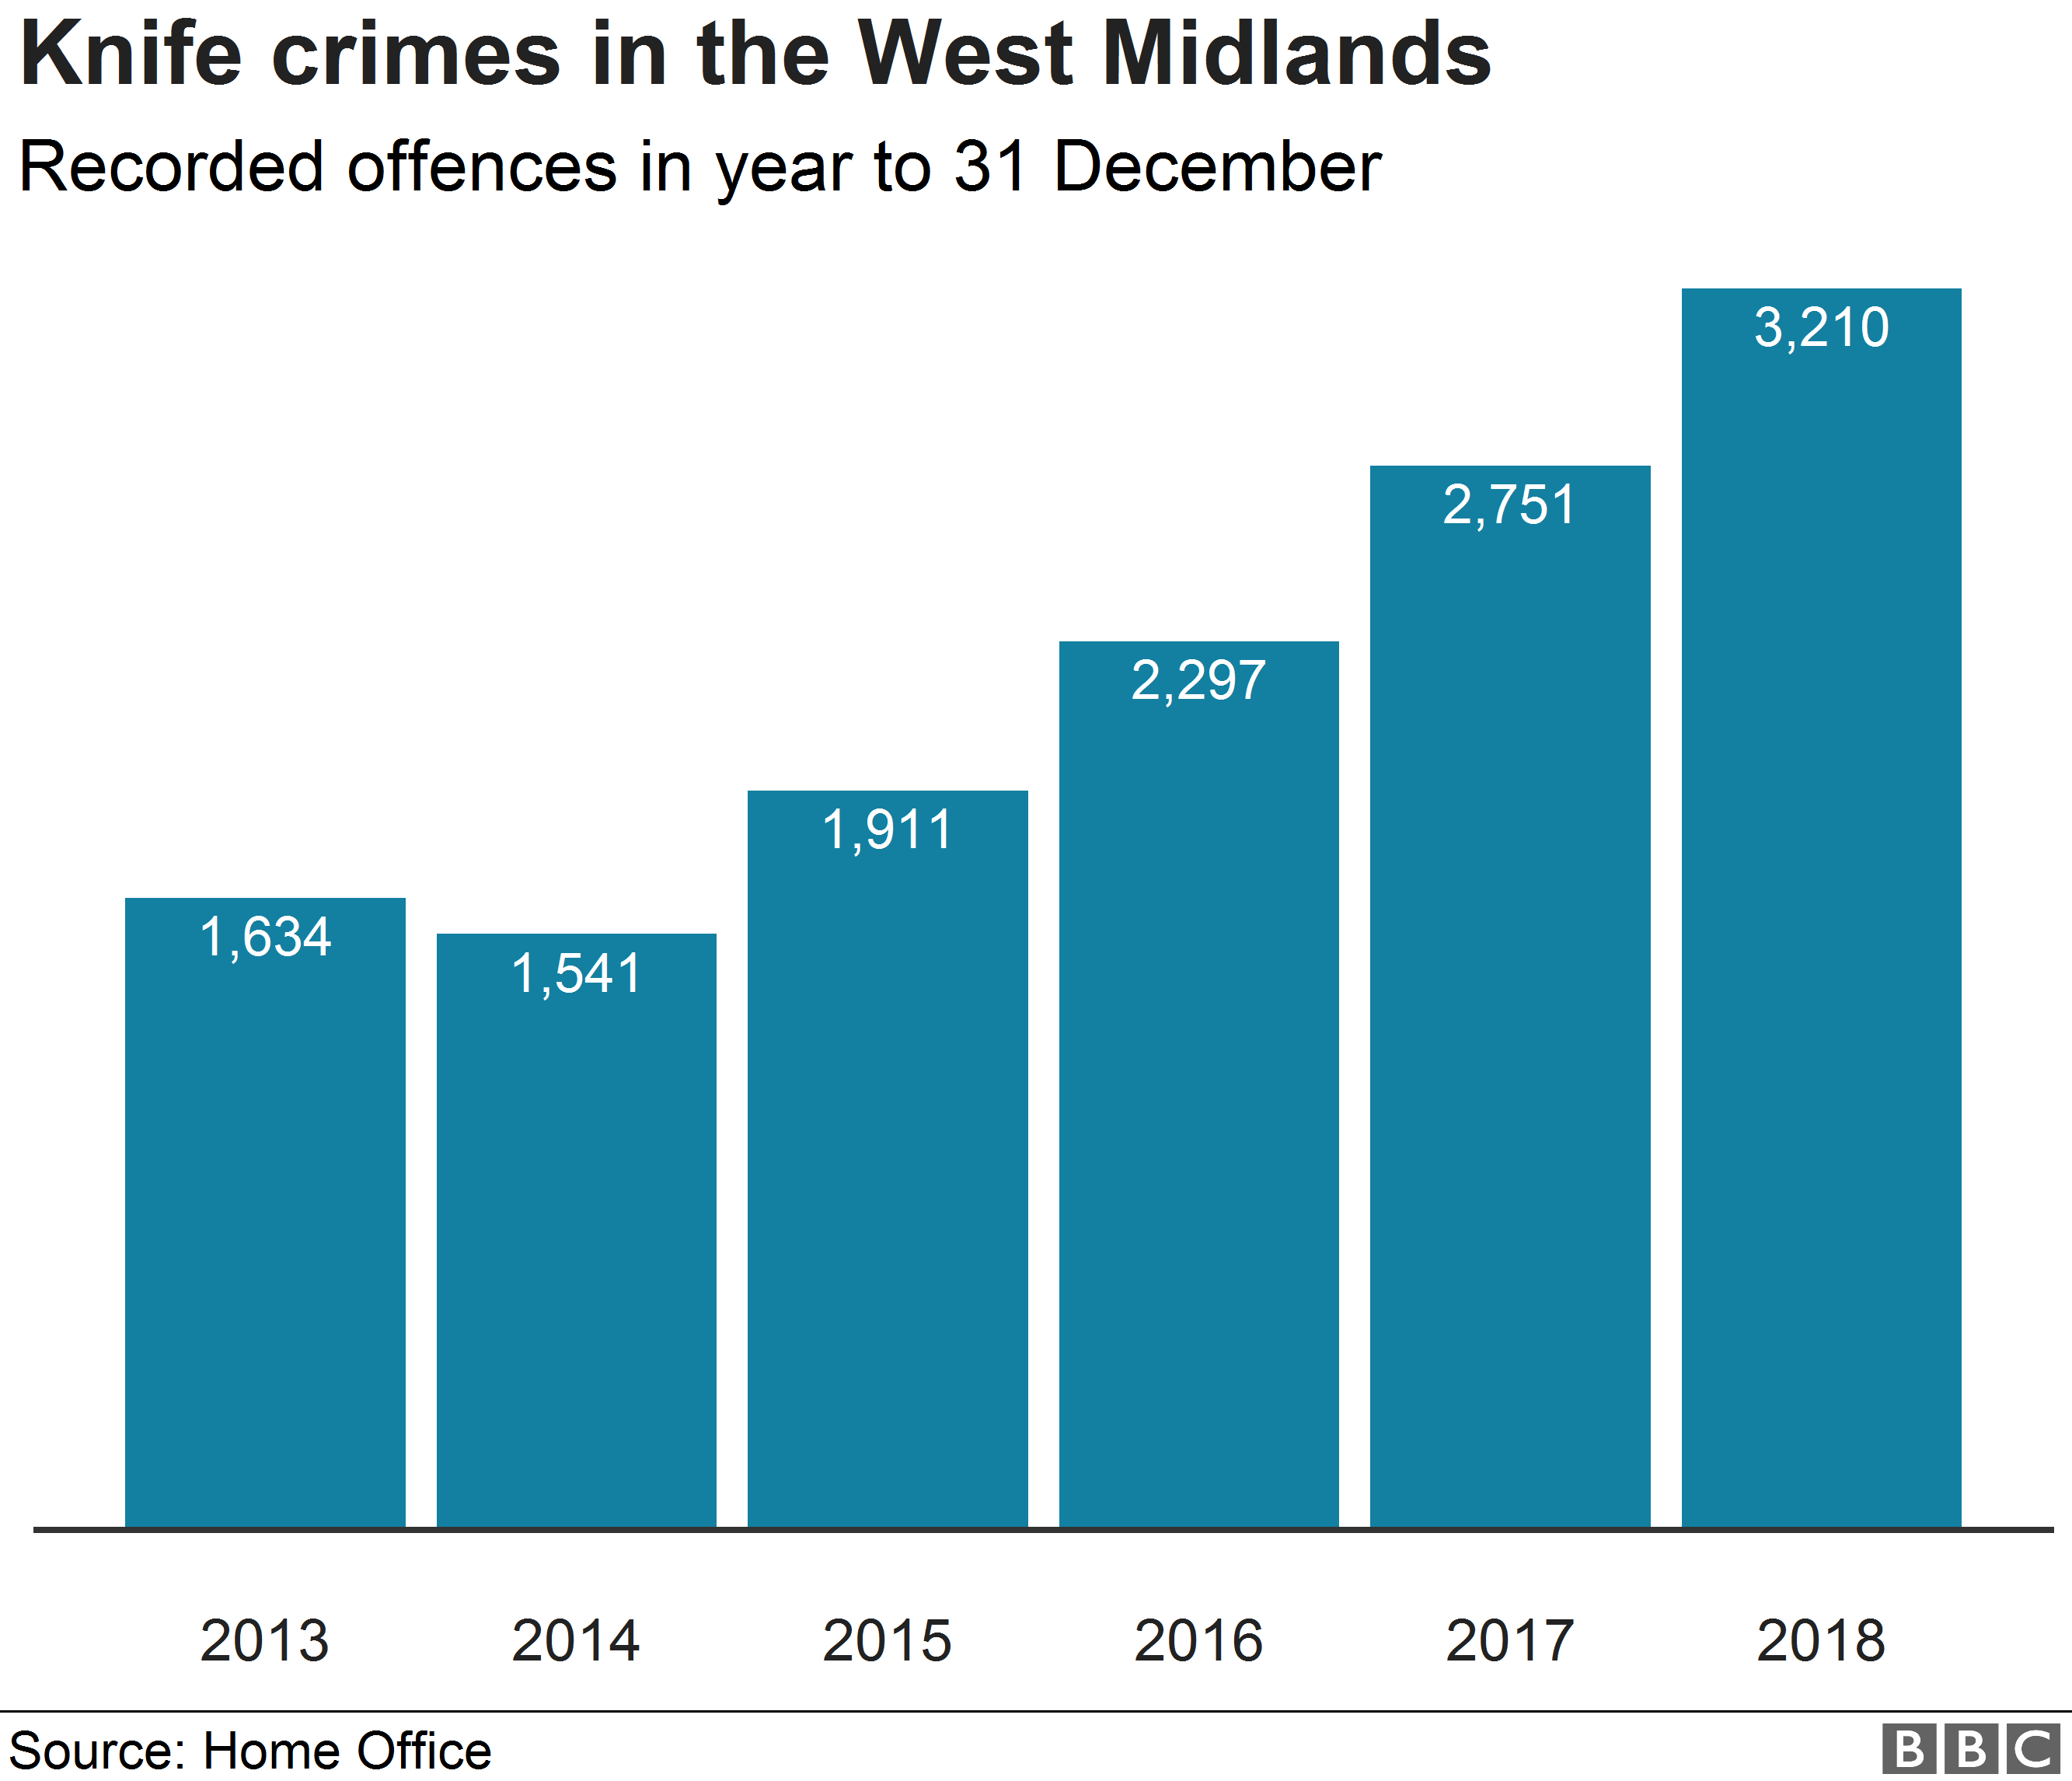 Chart showing increase in knife offences in the West Midlands